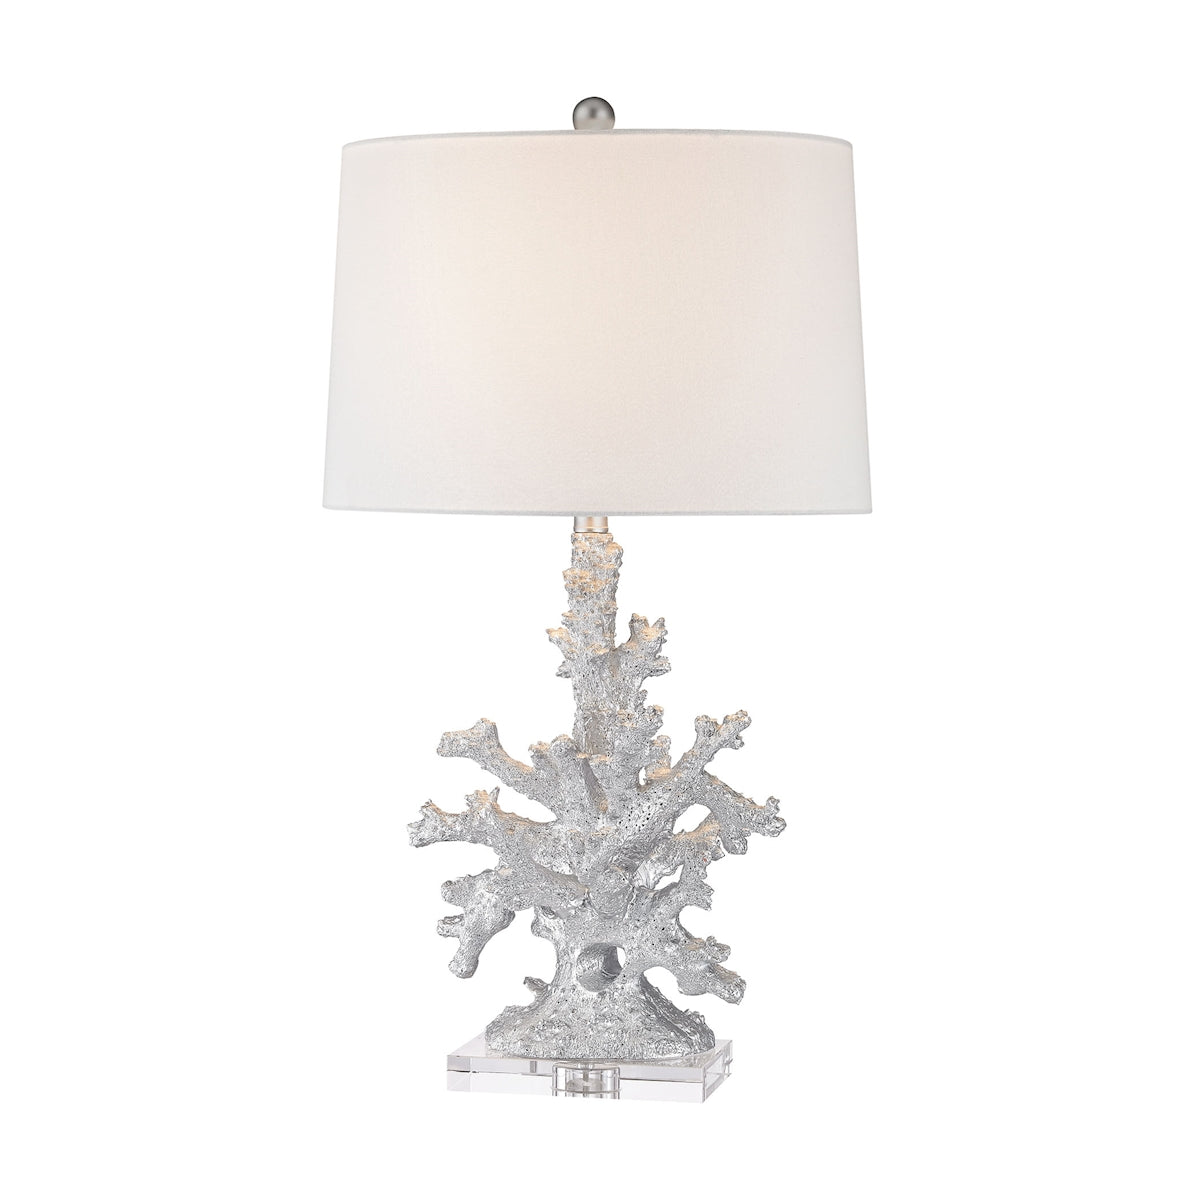 Trunk Bay 1 Light Table Lamp In Silver